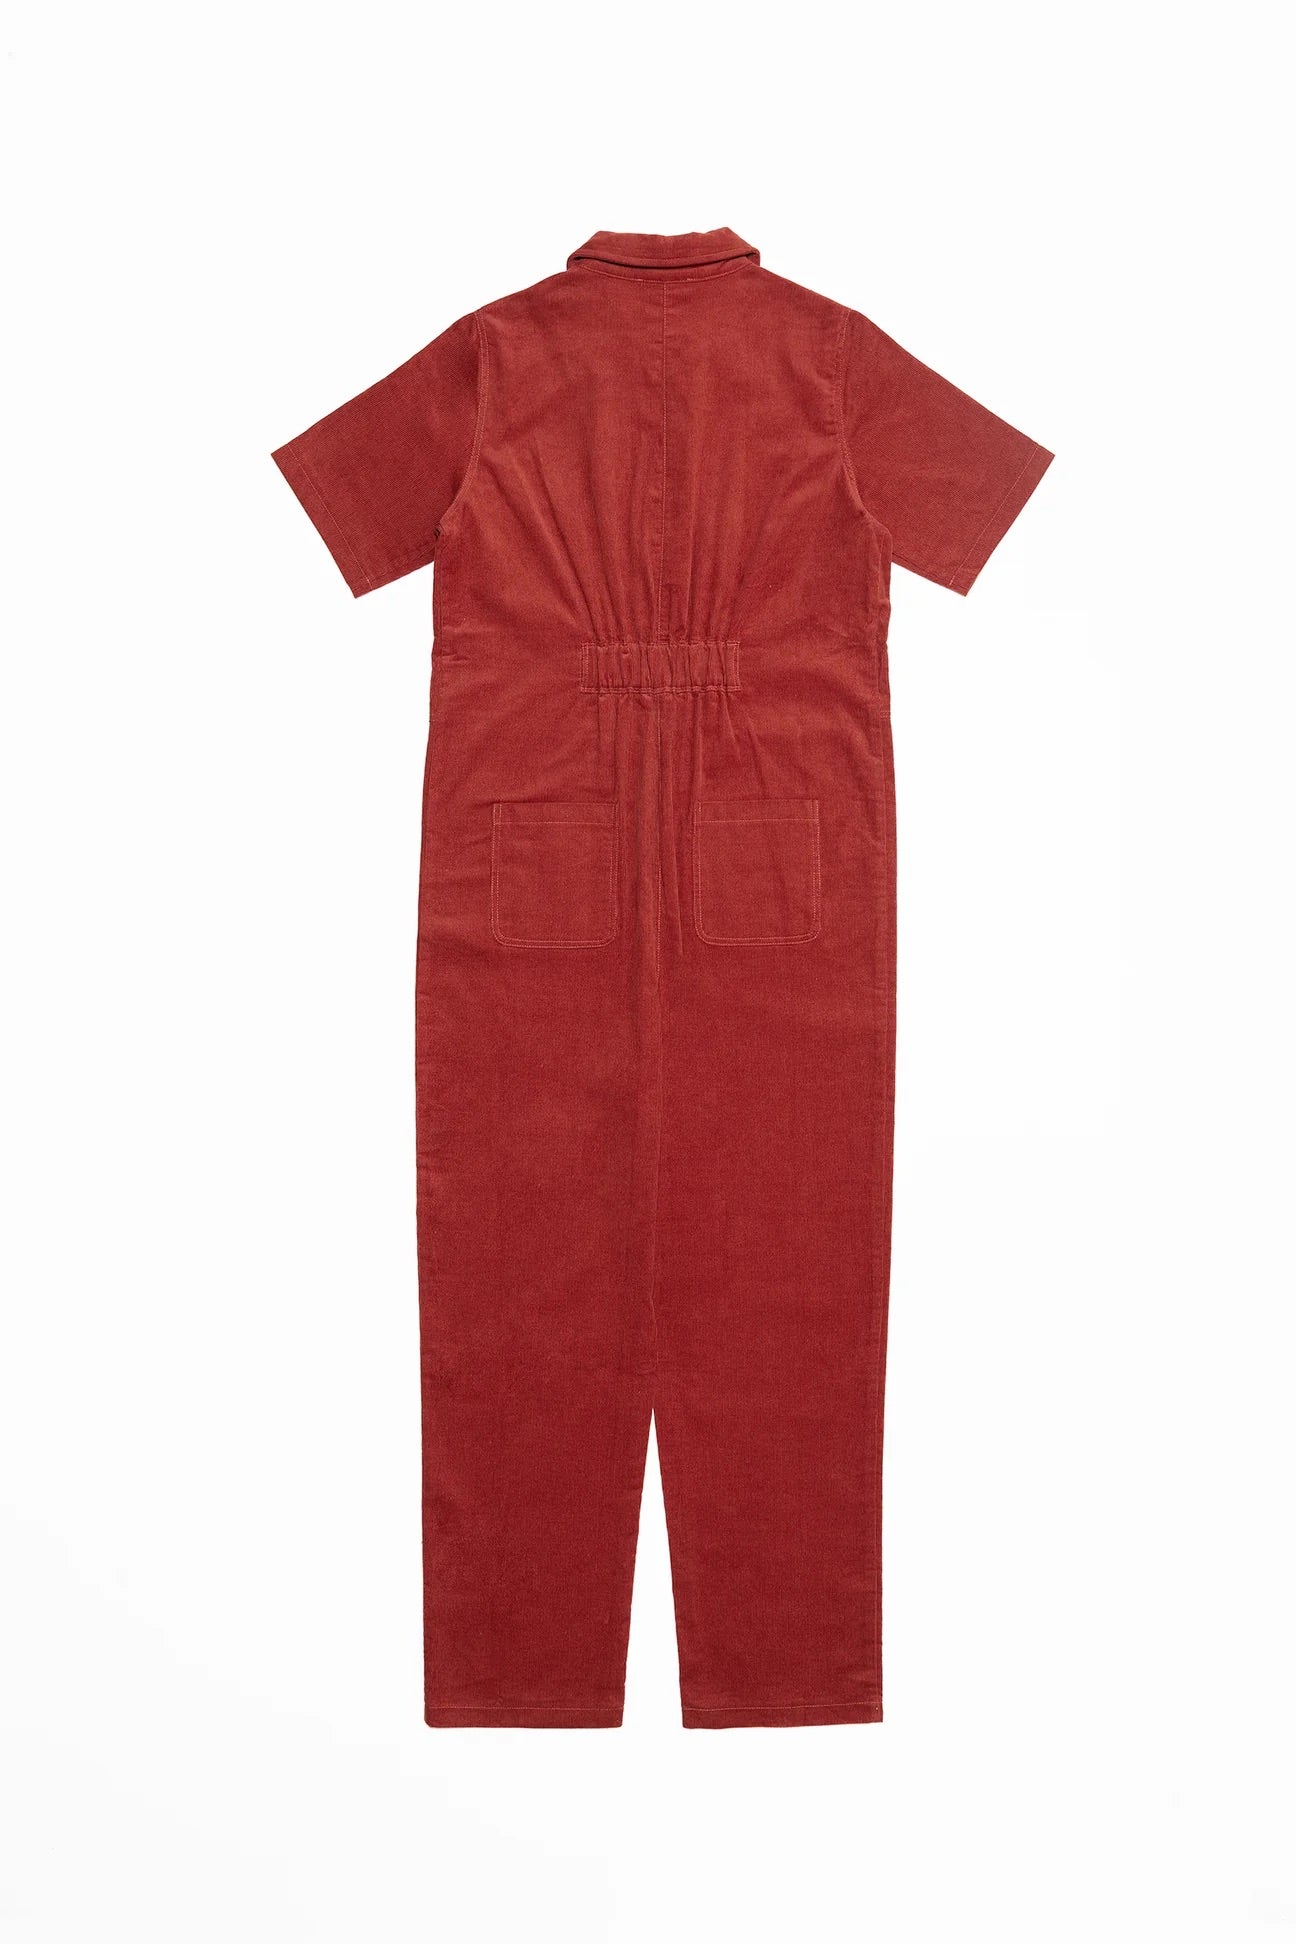 Mod Ref The Colby Jumpsuit in Brick